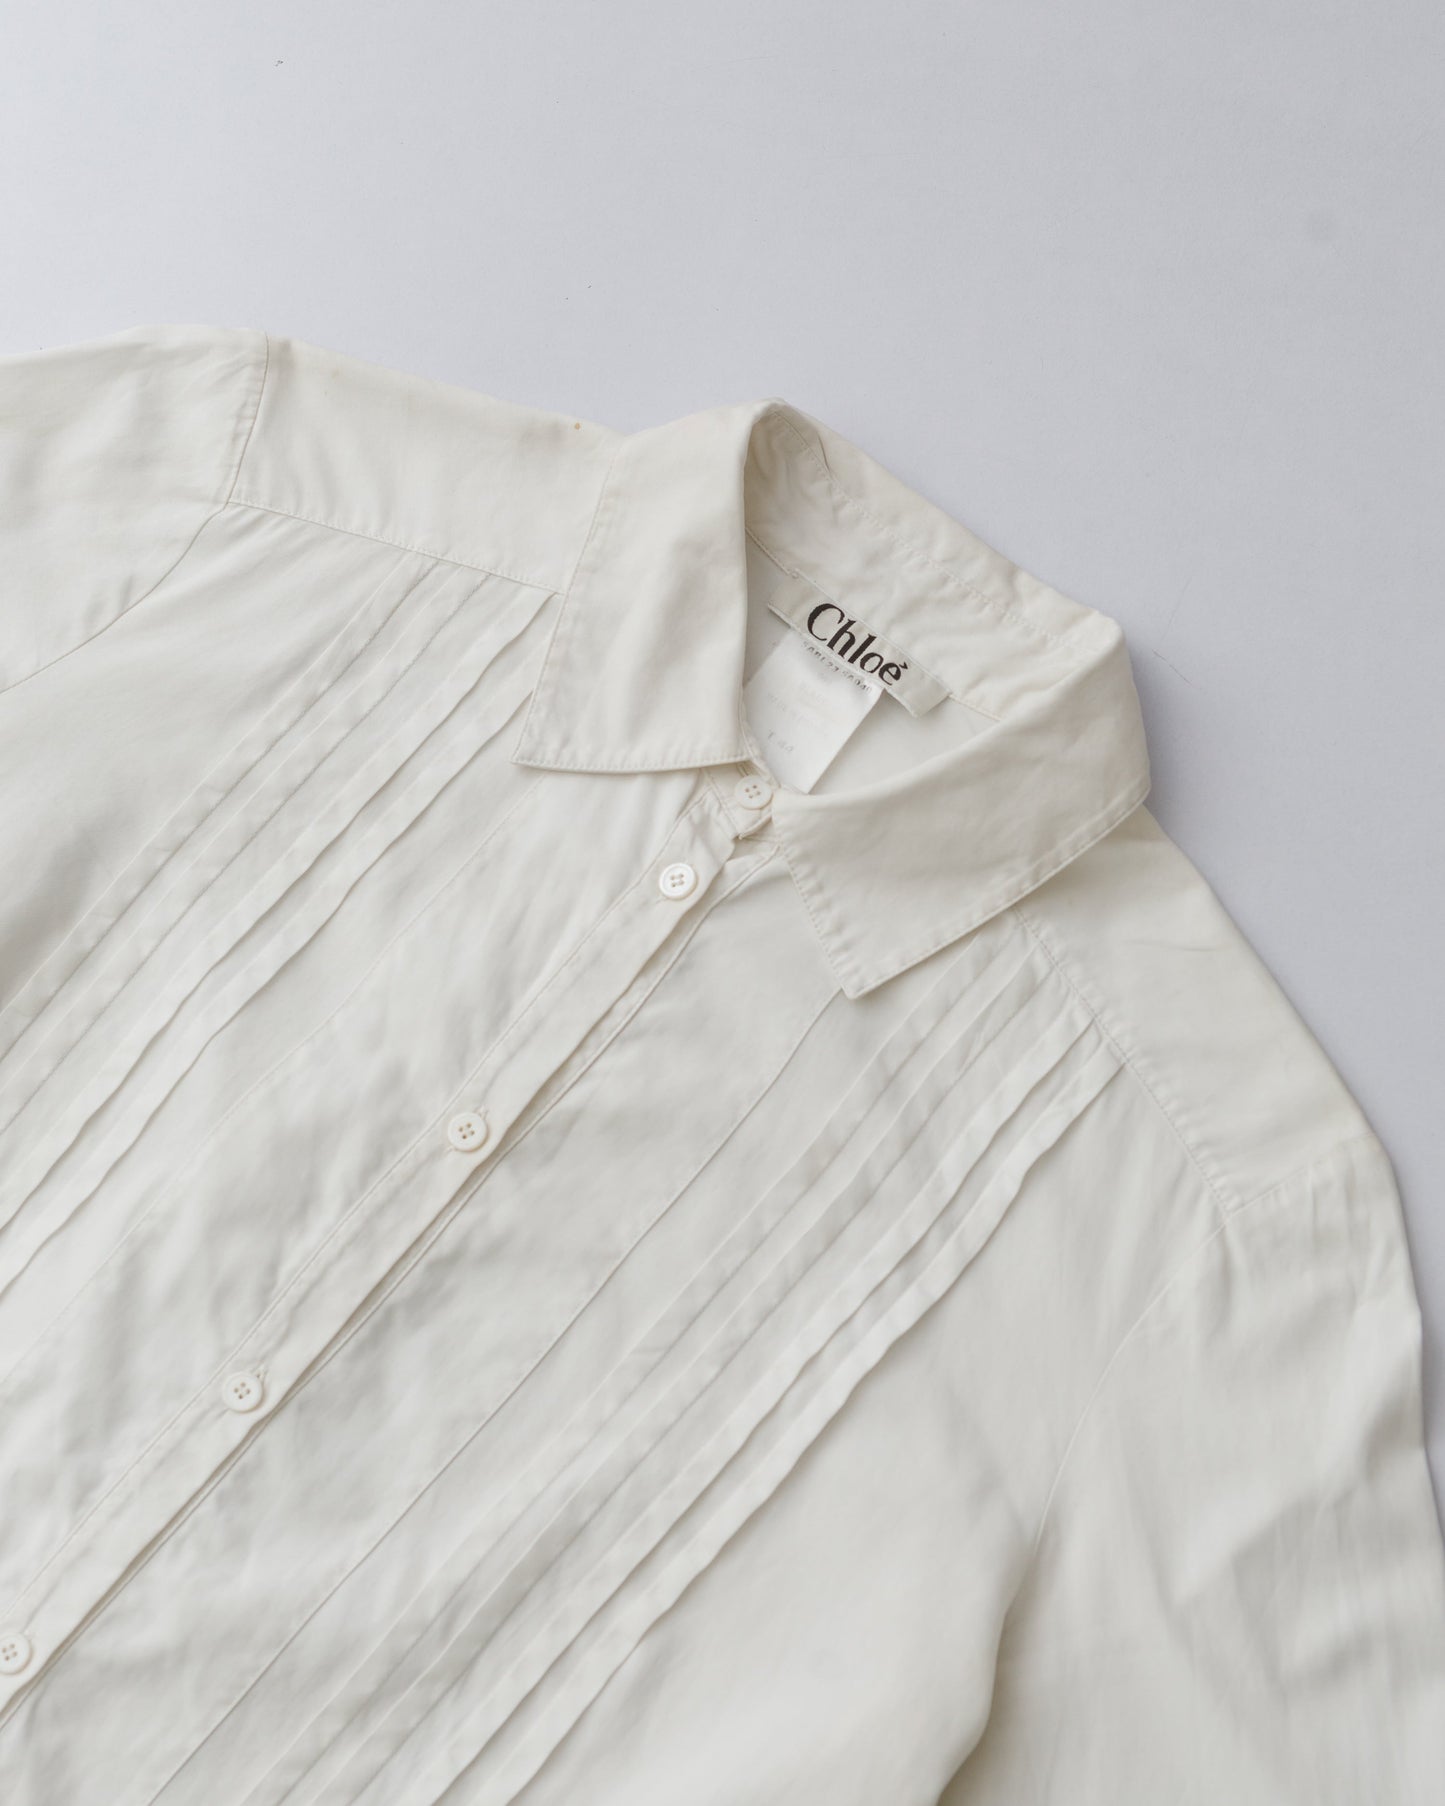 Pleated front dress shirt